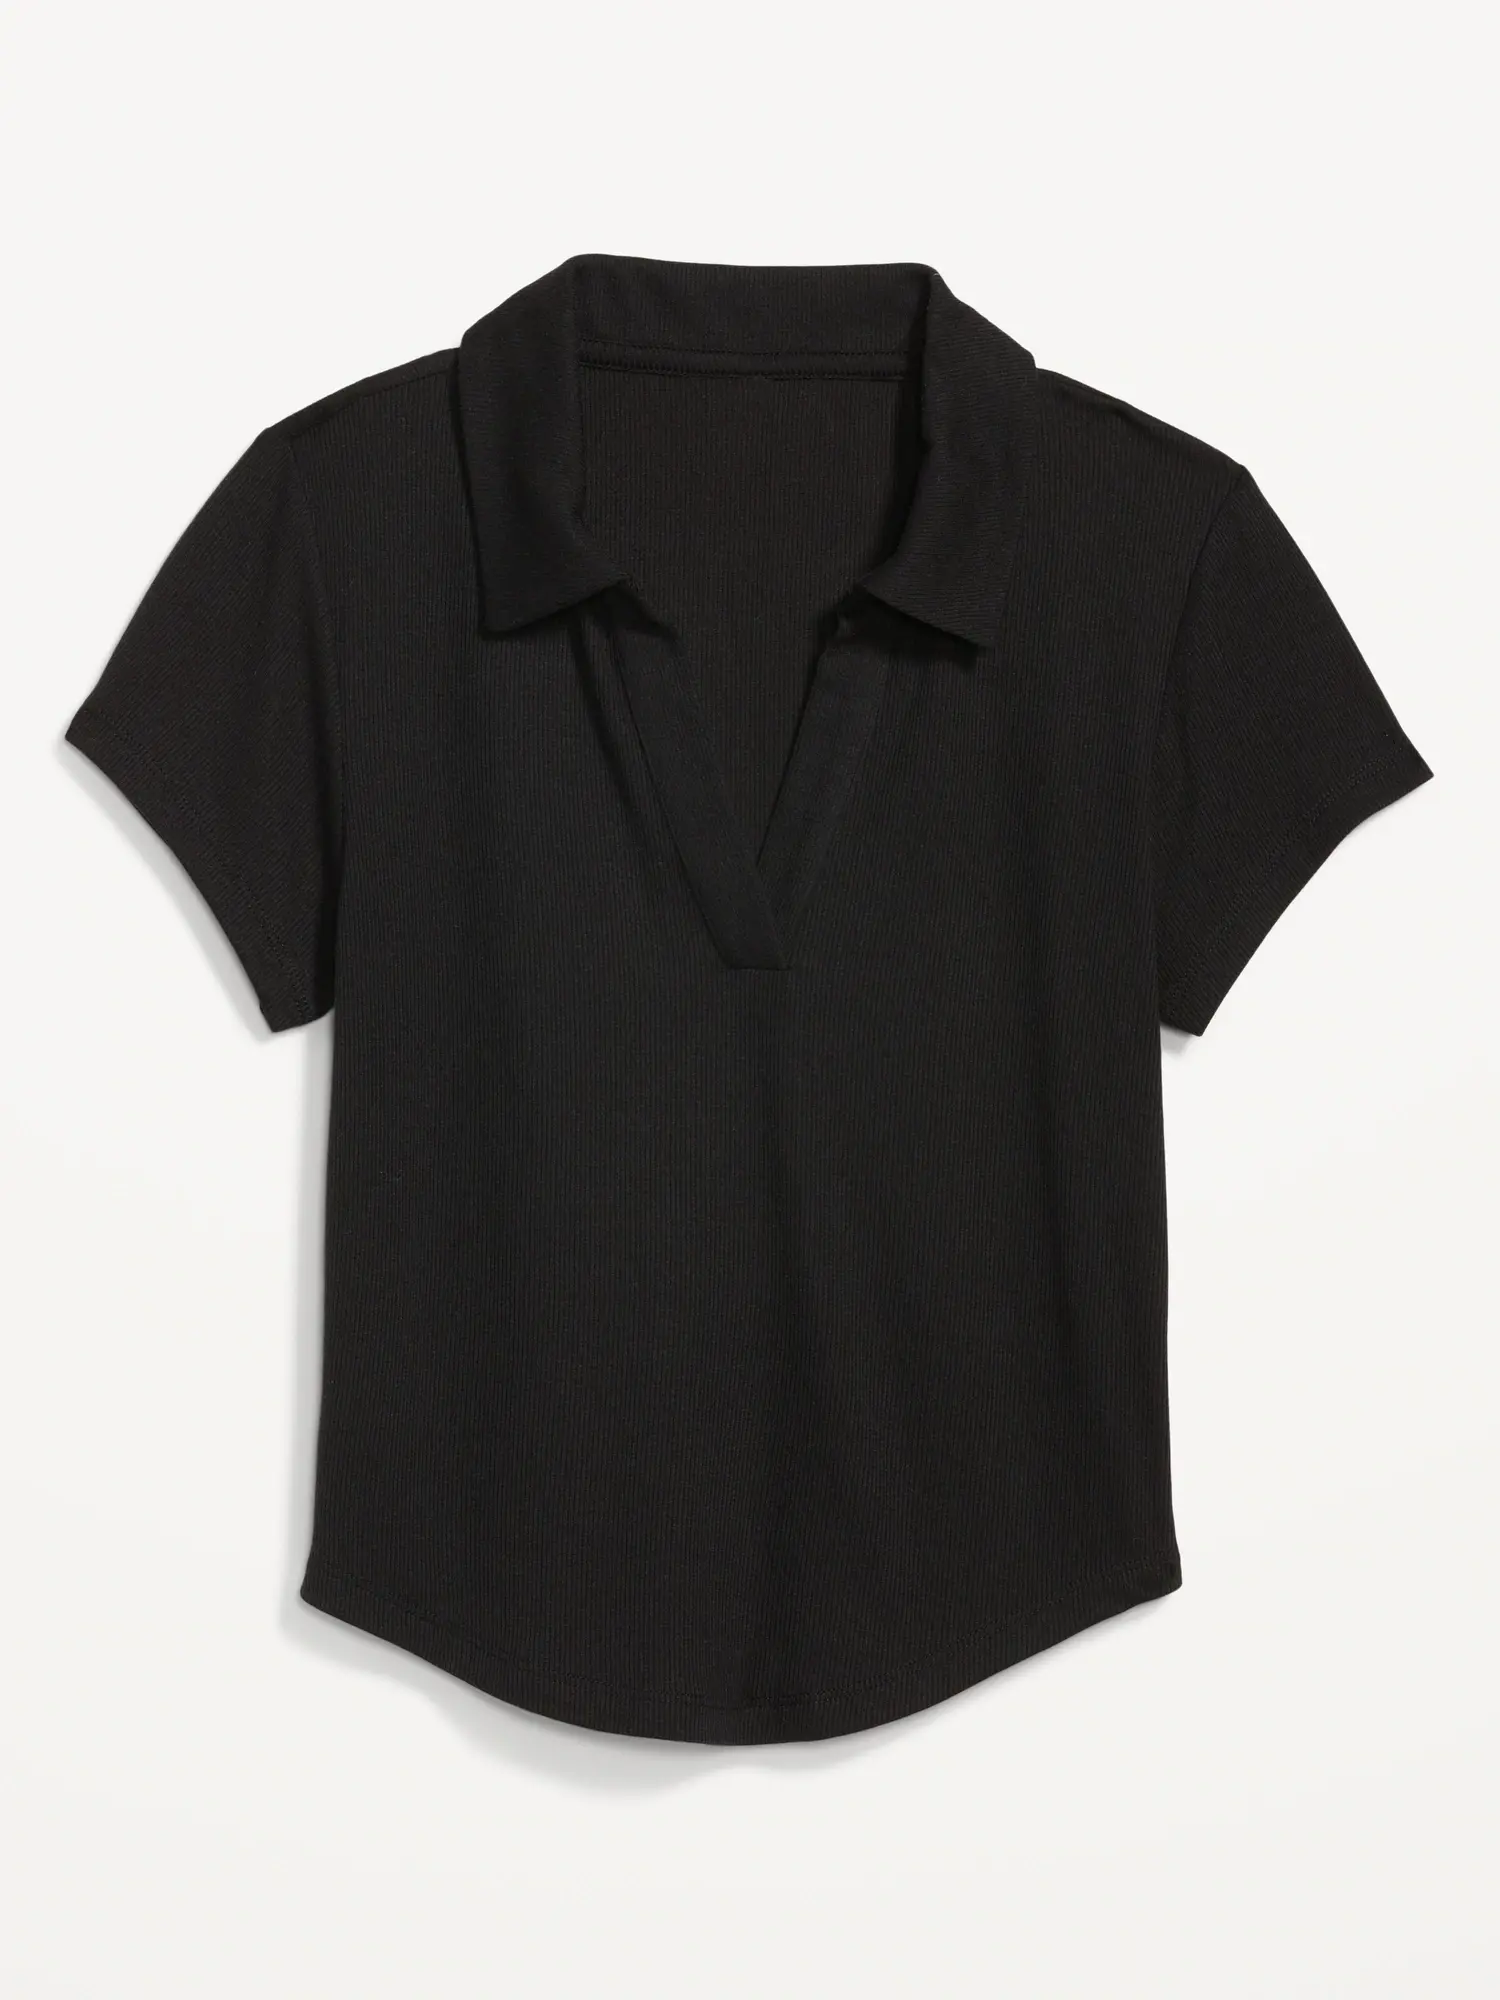 Old Navy UltraLite Rib-Knit Cropped Polo Shirt for Women black. 1